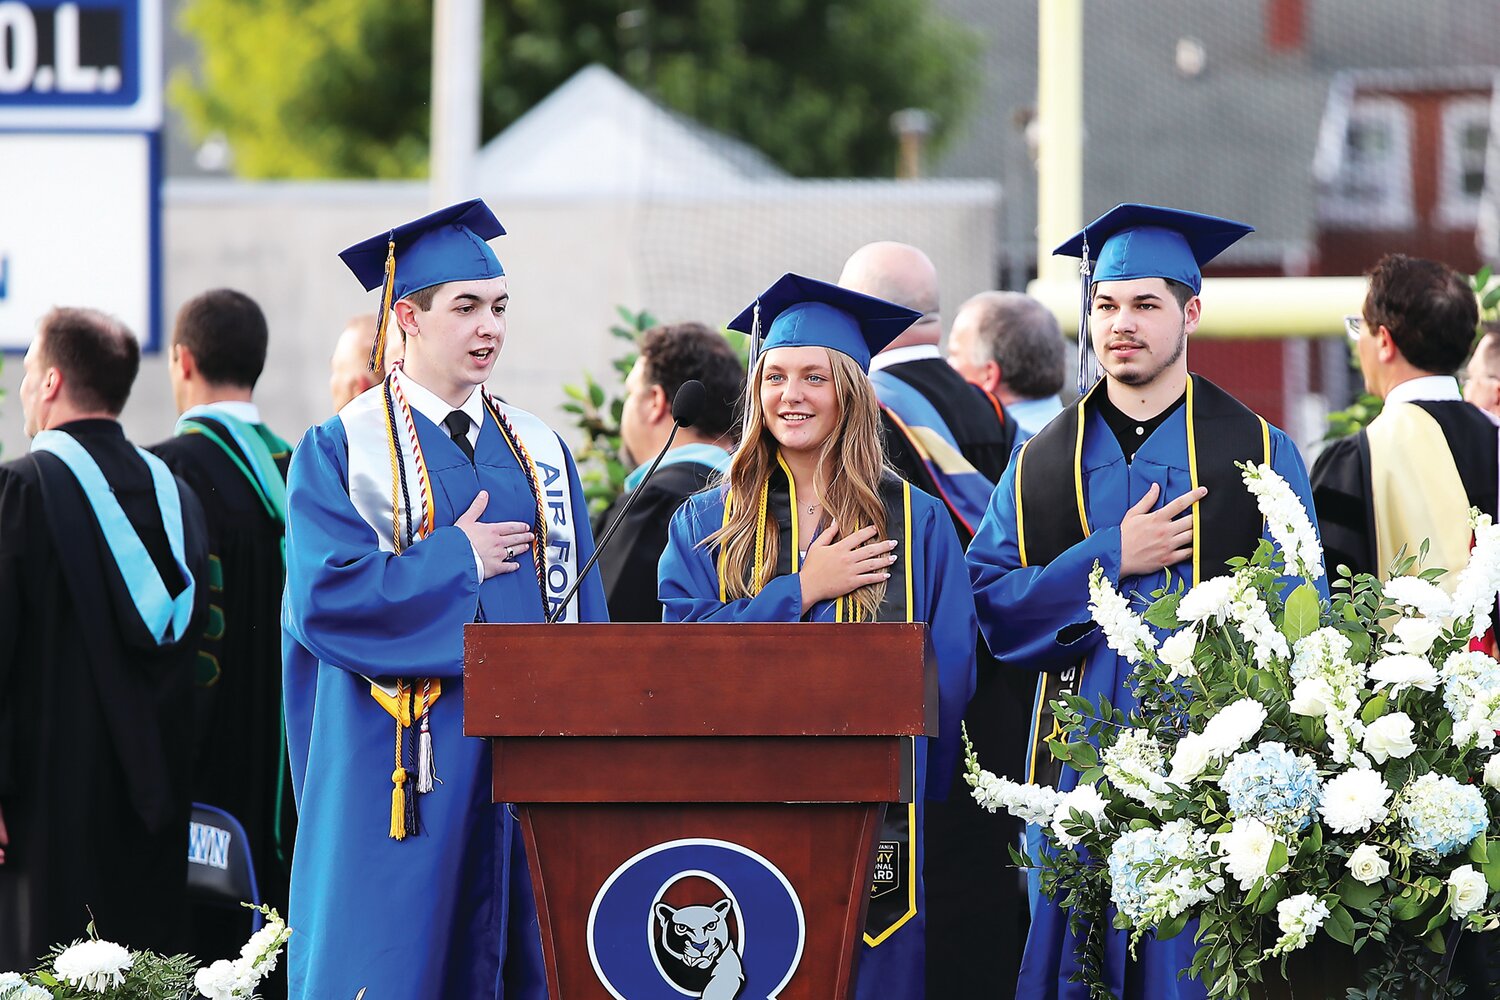 From left: W. Connor Frisch, Carlee Roesener, and Chris Owens say the Pledge of Allegiance. They had the highest GPAs among graduating seniors who are joining the military. Frisch is joining the U.S. Air Force, Roesener is joining the Pennsylvania Army National Guard, and Owens is joining the U.S. Army.